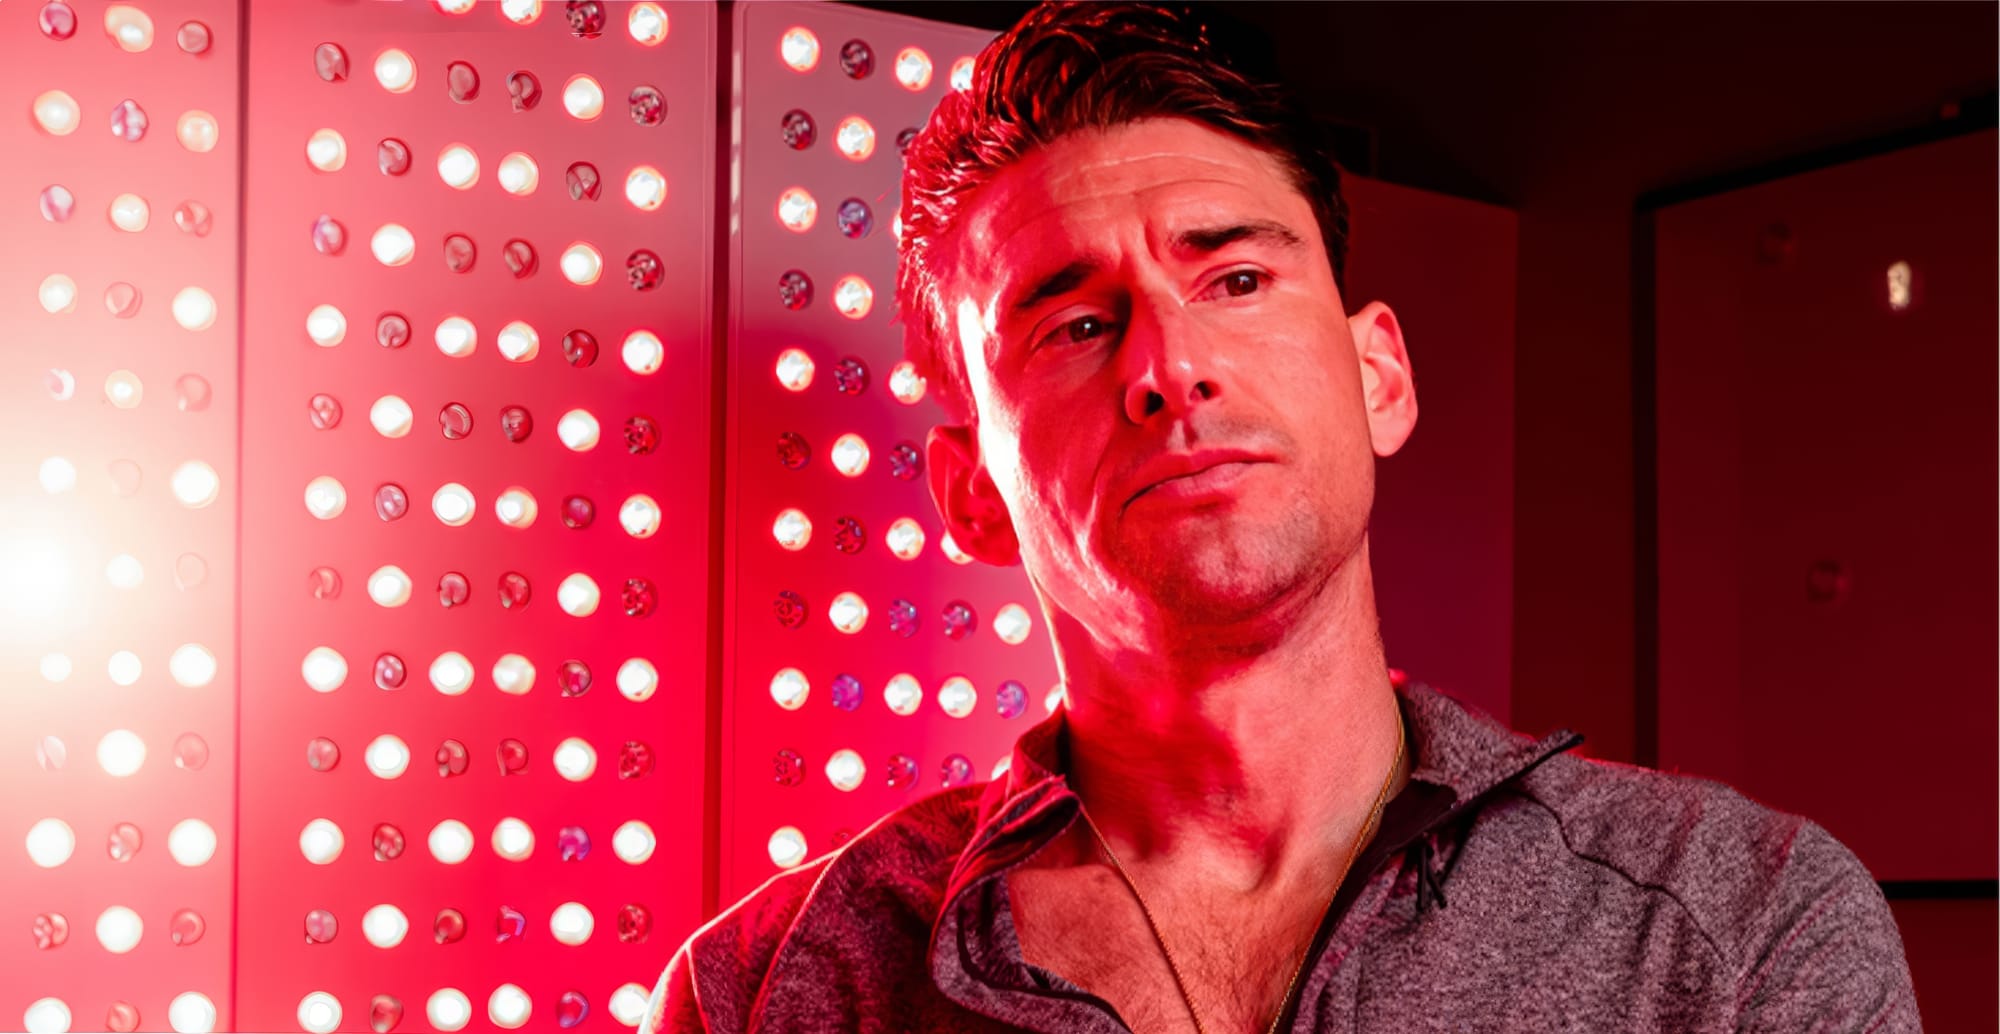 Everything About Ben Greenfield And Red Light Therapy